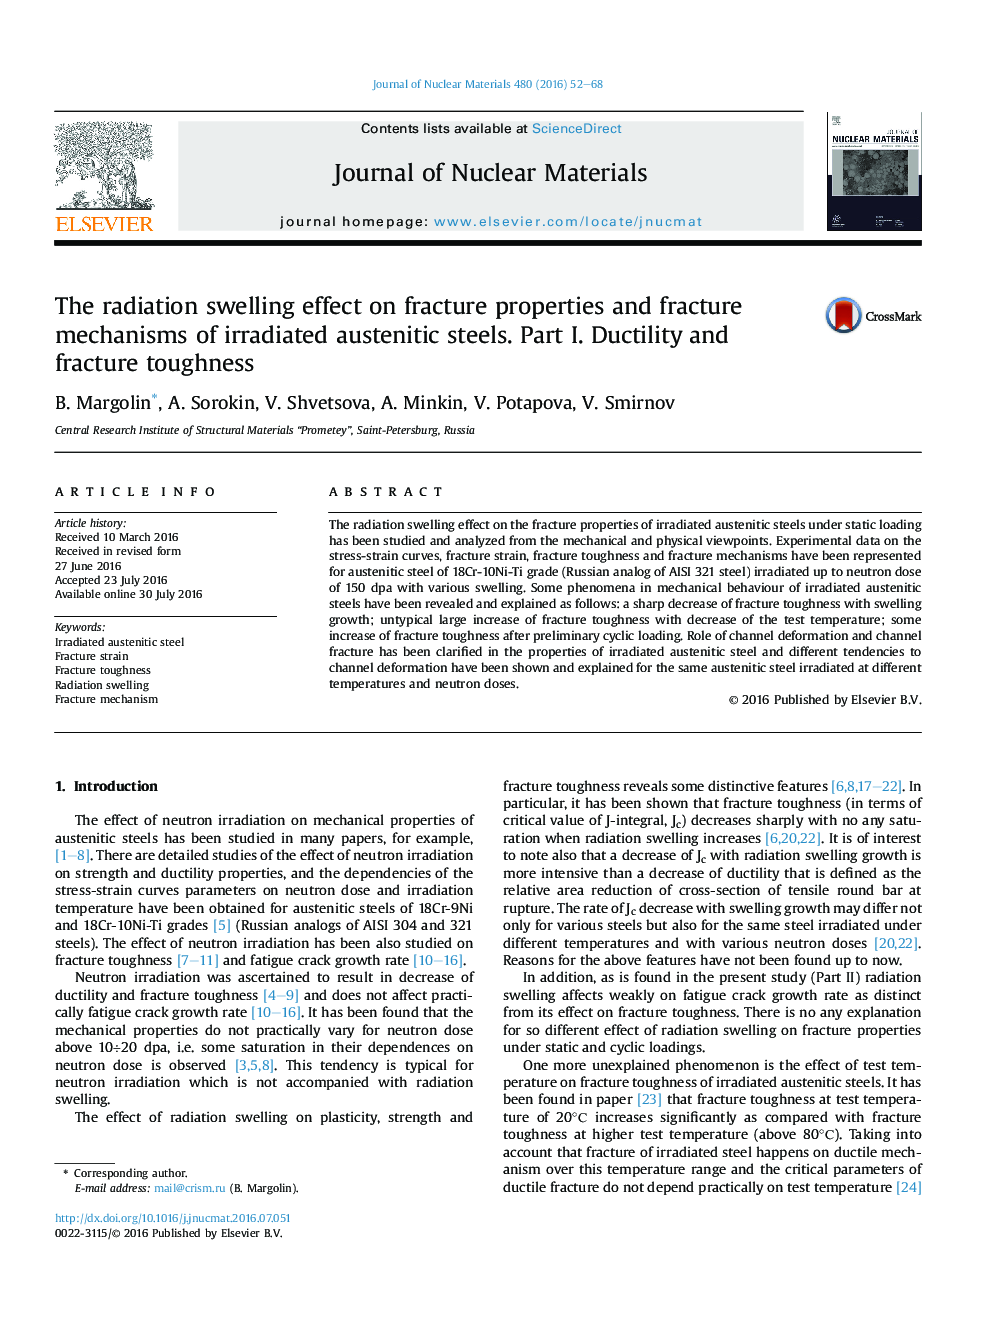 The radiation swelling effect on fracture properties and fracture mechanisms of irradiated austenitic steels. Part I. Ductility and fracture toughness